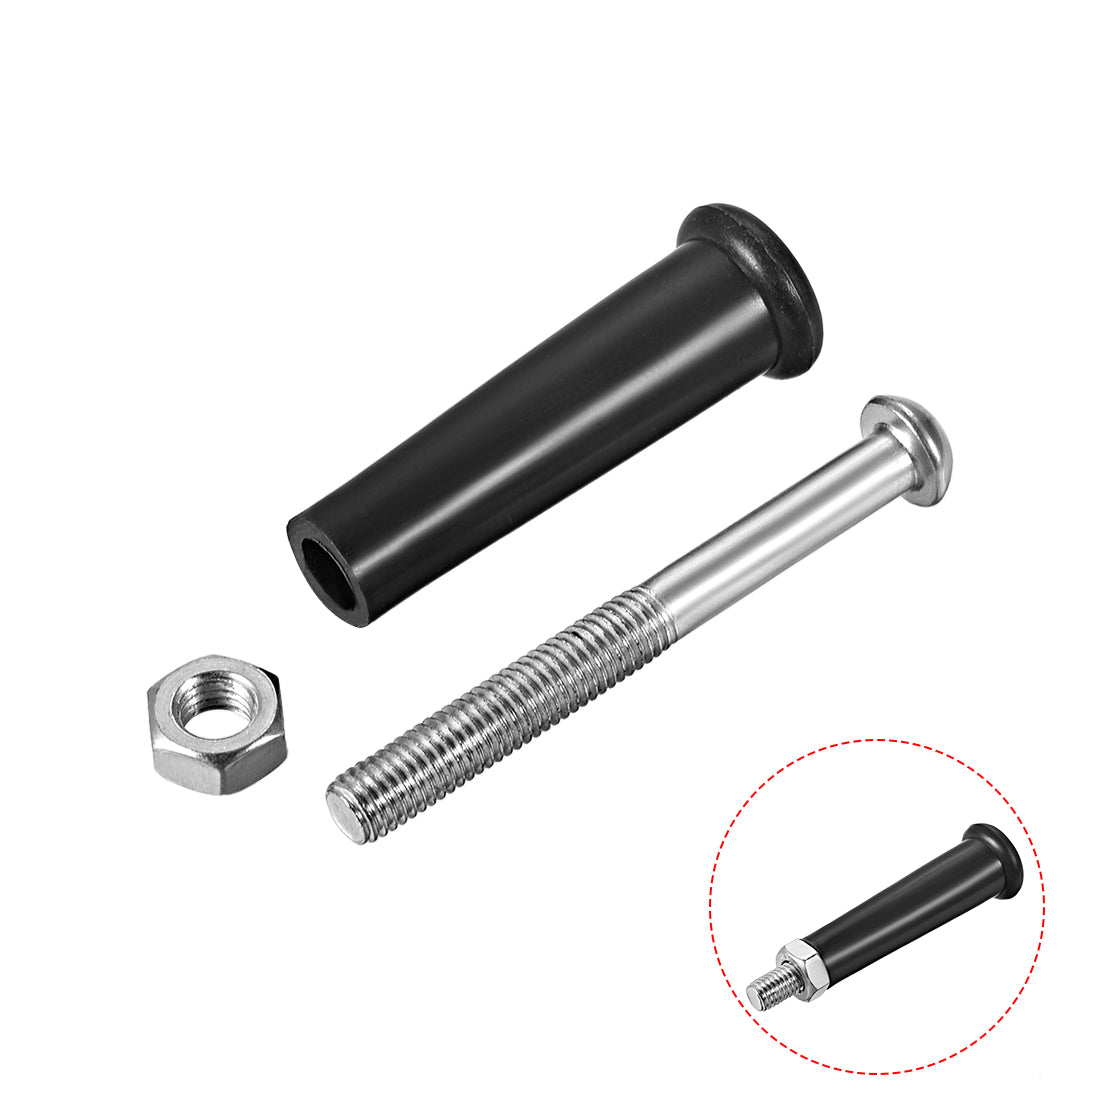 uxcell Uxcell Clamping Handles Screw Knobs M10 Threaded Plastic Metal Revolving Handle Grip